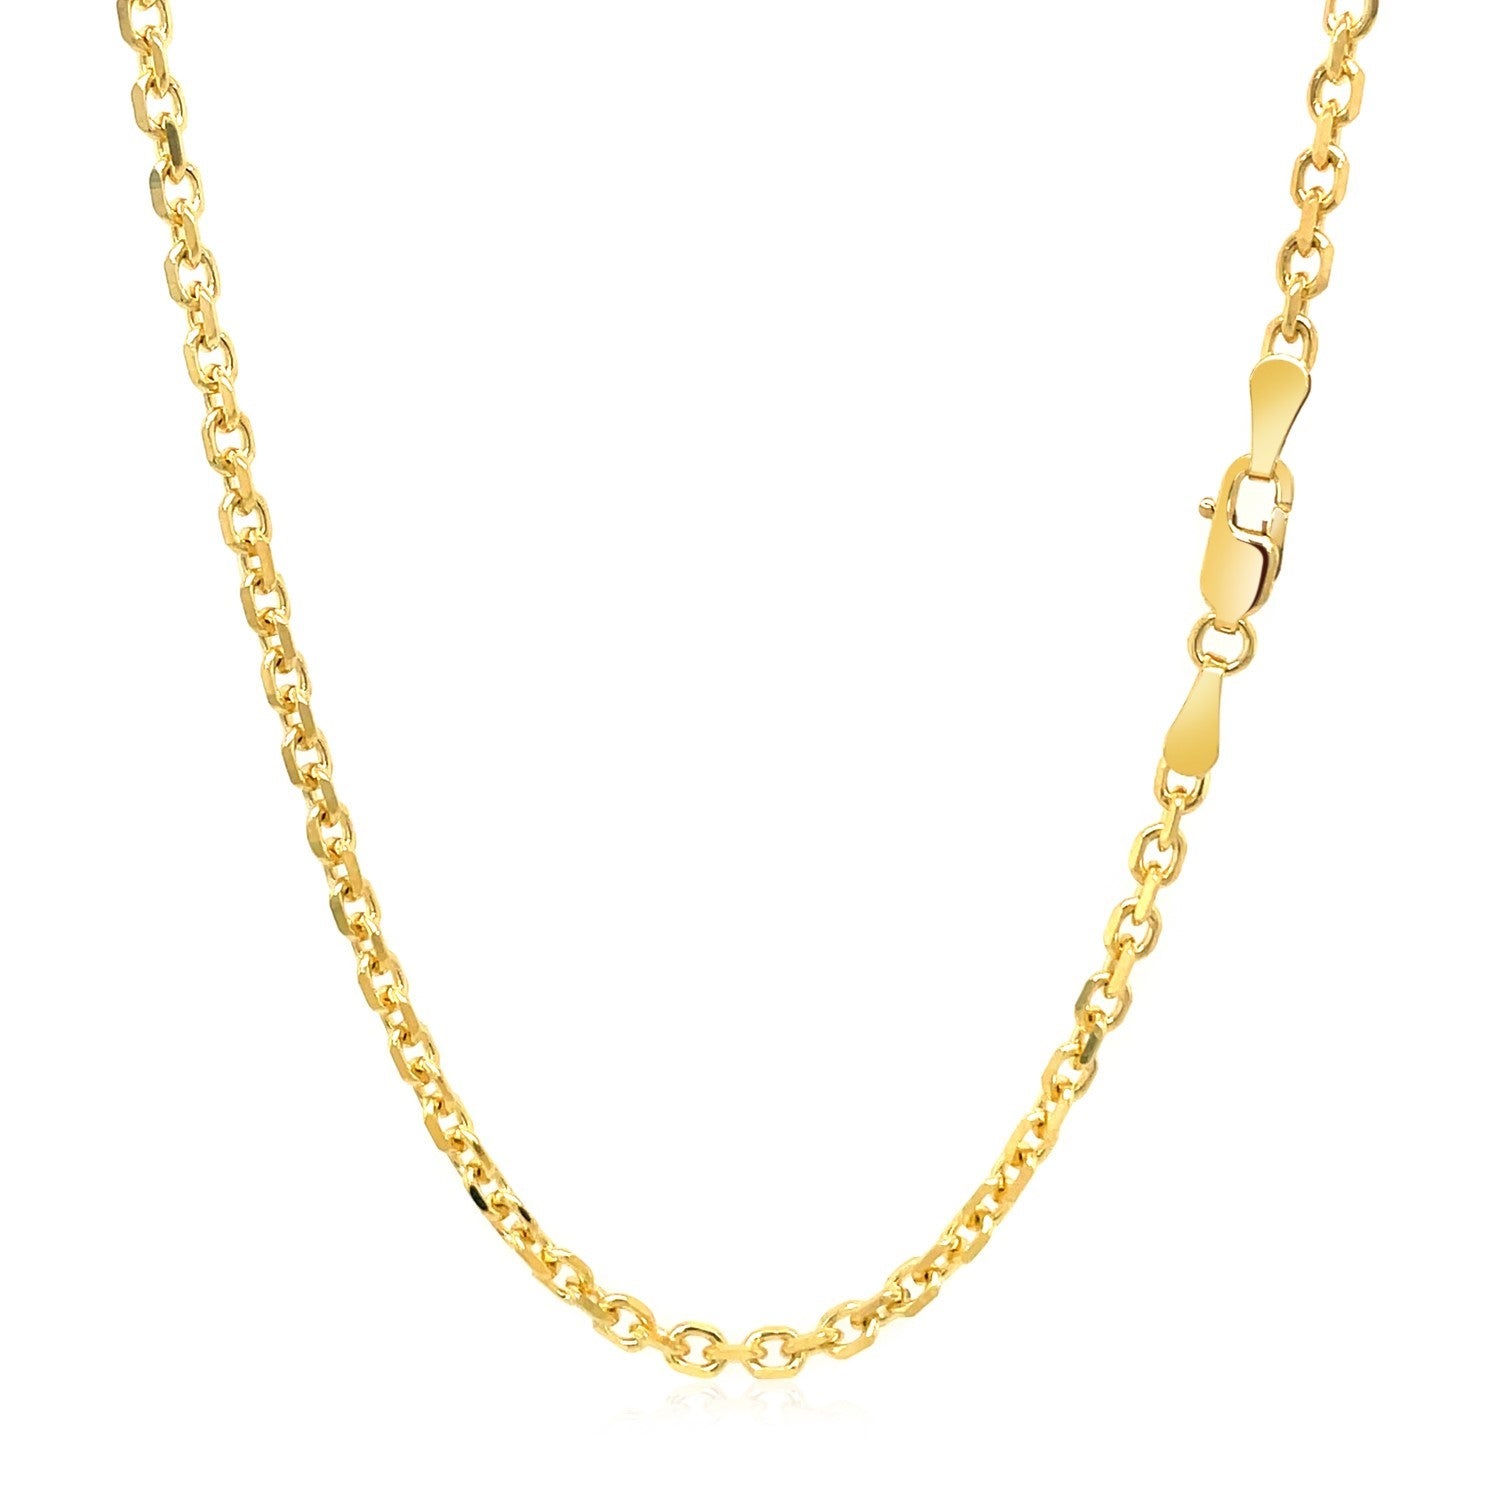 2 6Mm 18K Yellow Gold Diamond Cut Cable Link Chain 77467-3